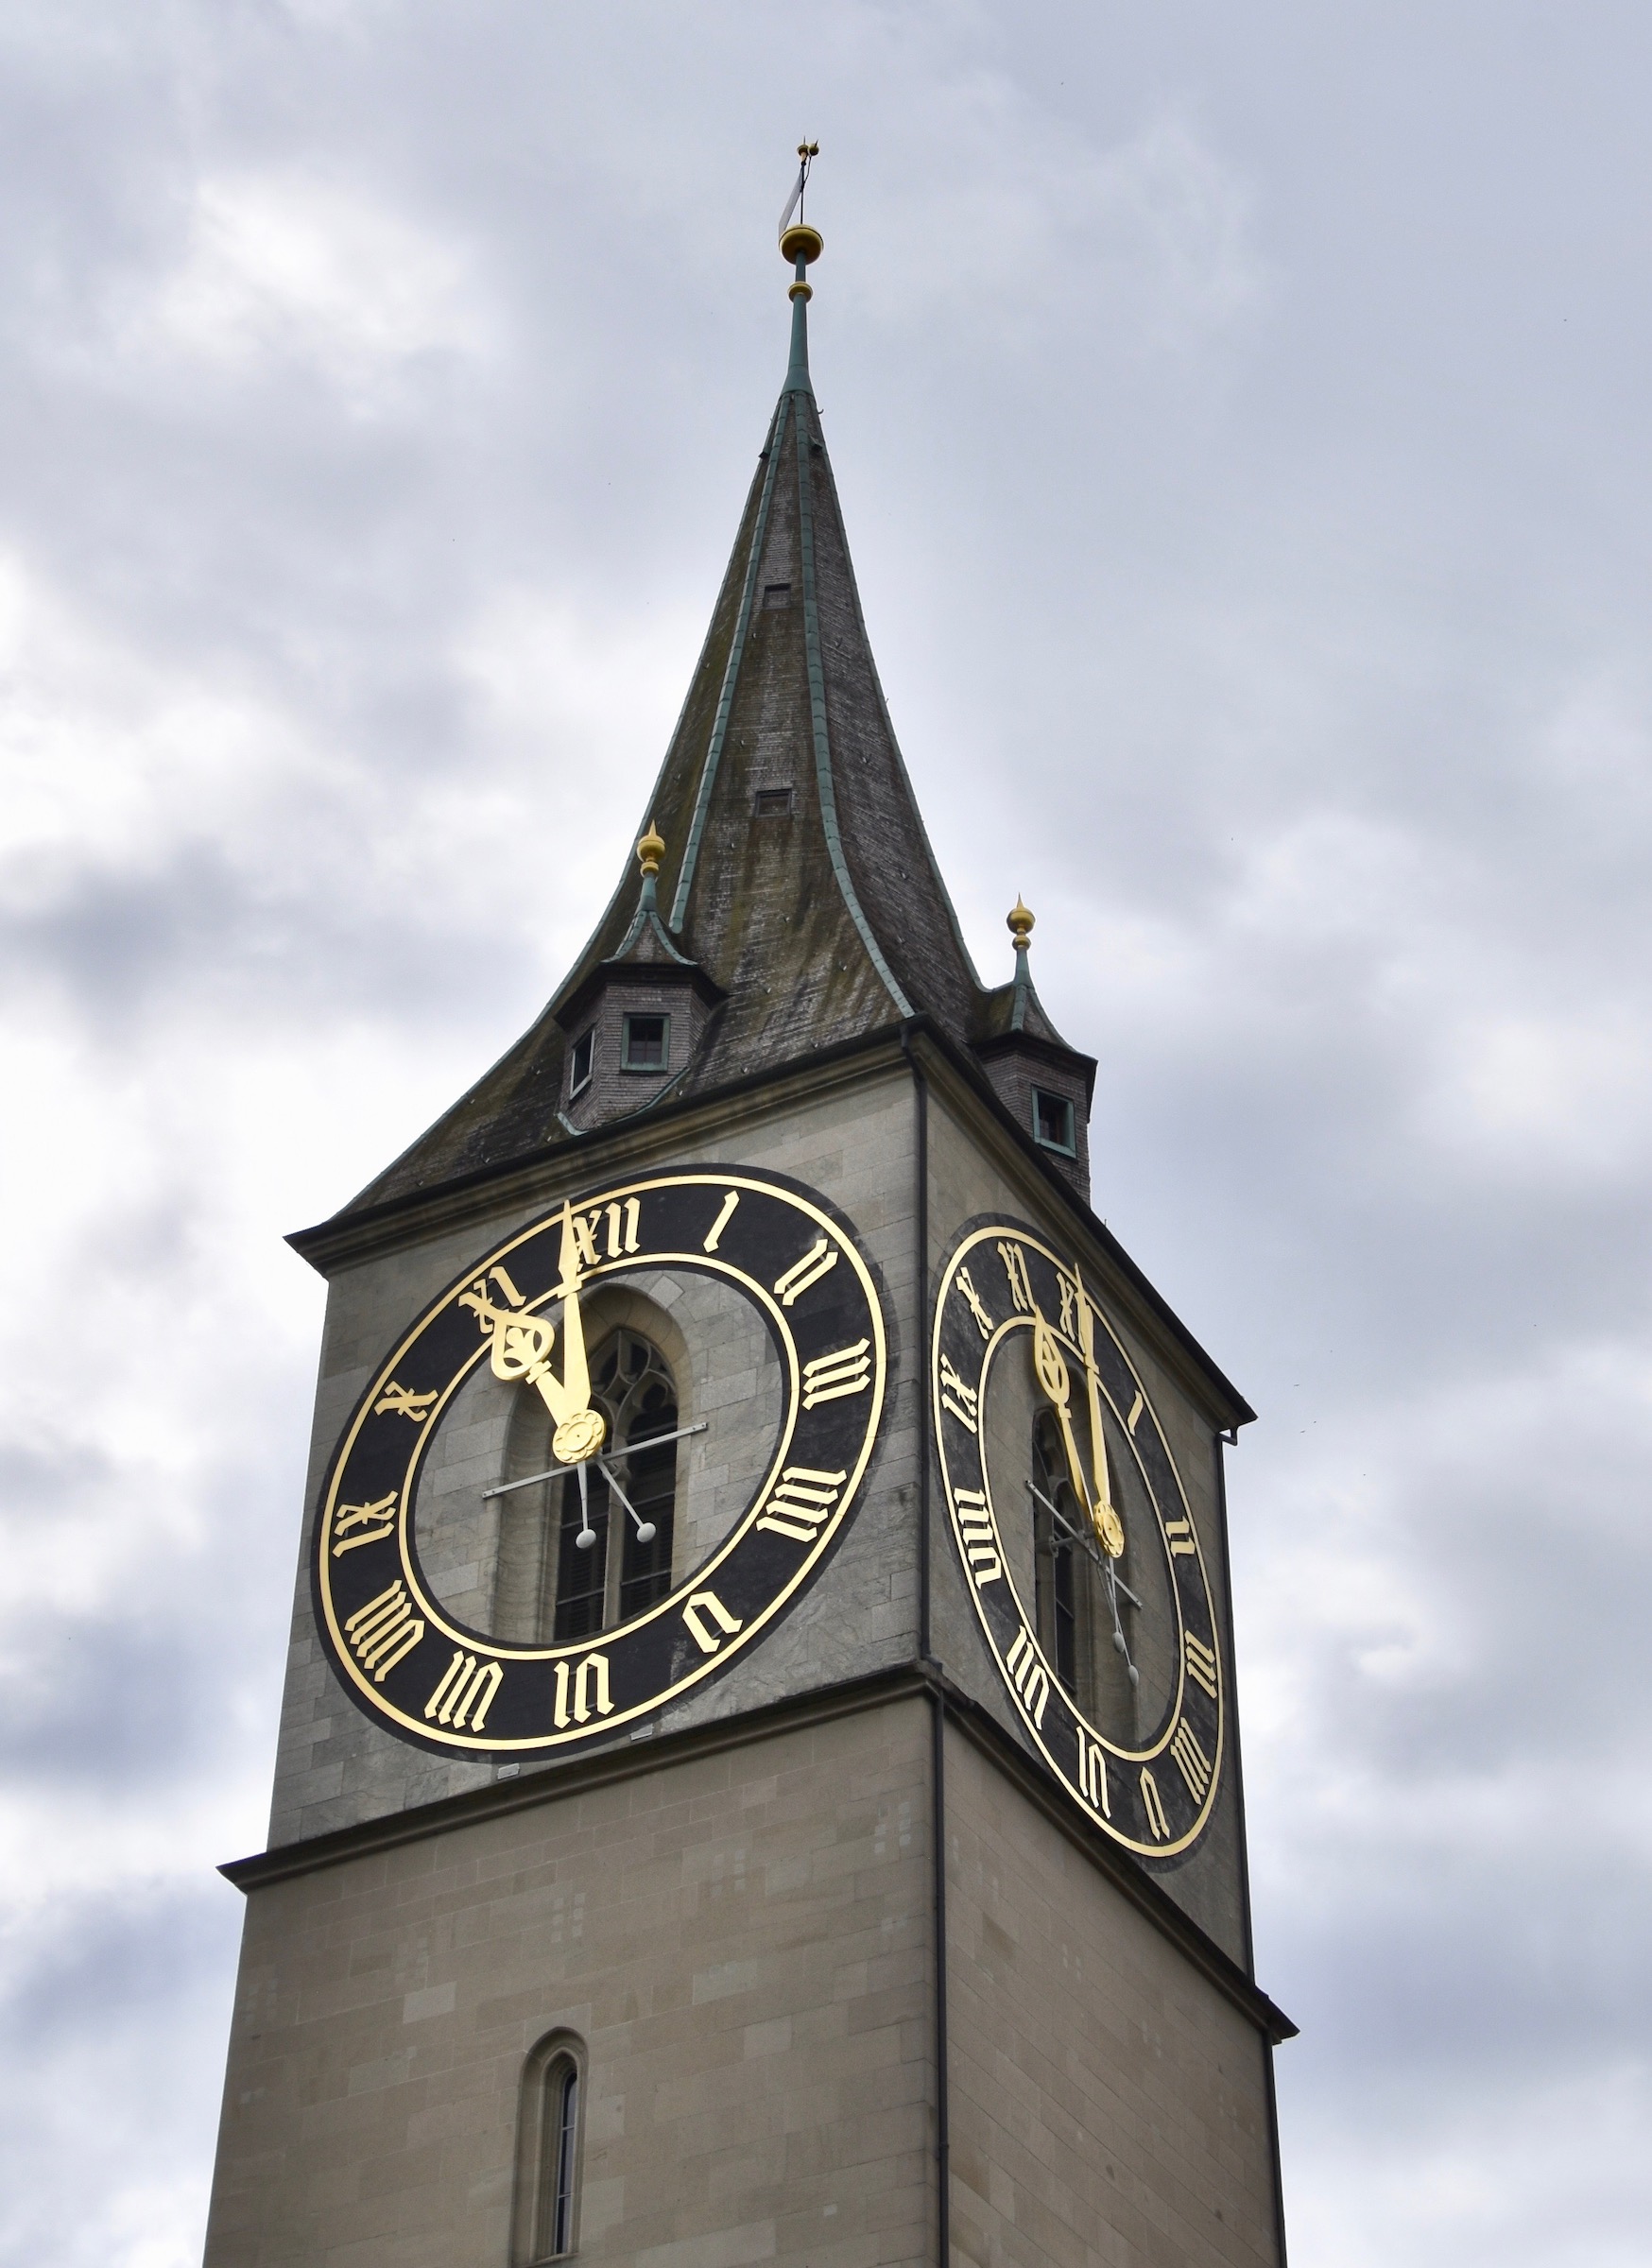  St. Peter's Spire - Largest Clock Face in Europe, Zurich